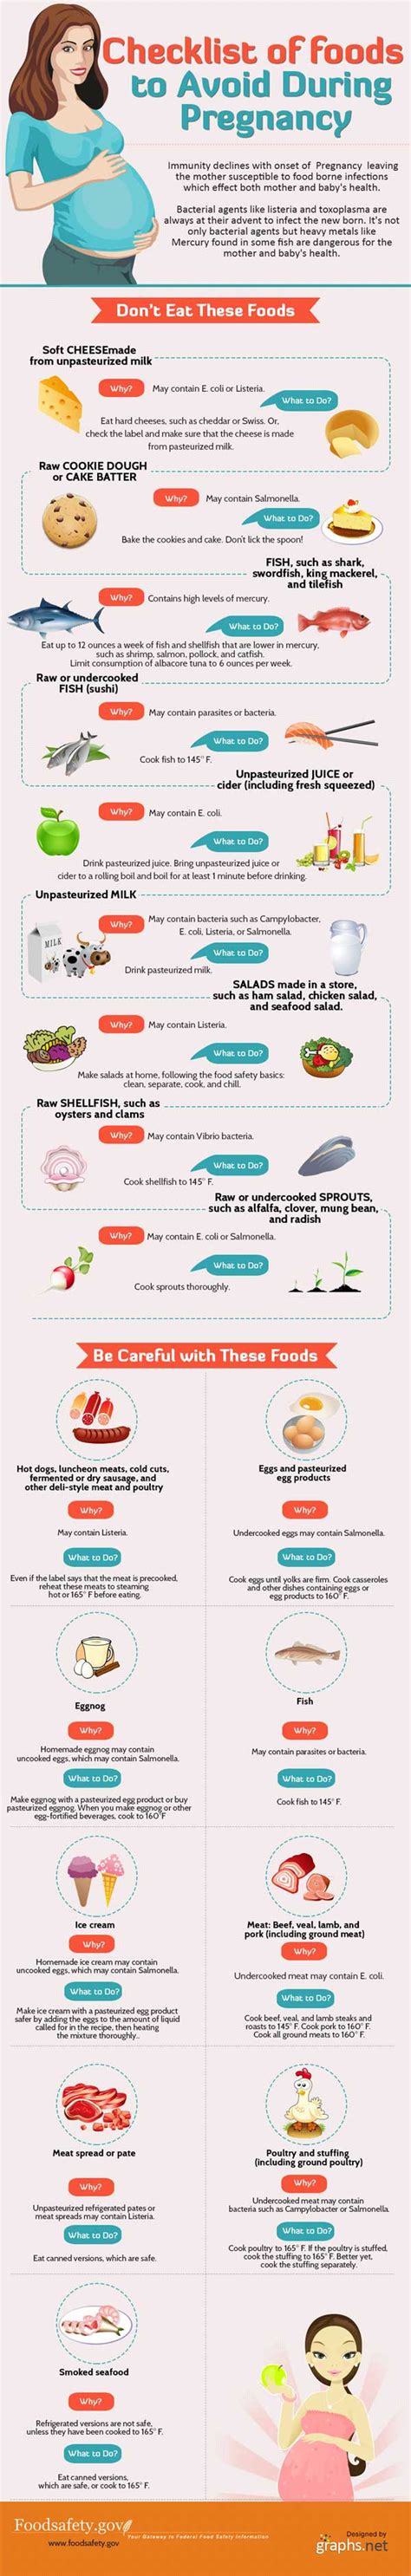 To stay safe, also avoid these foods during your pregnancy. Avoid These Foods During Pregnancy - Health Tips For Men ...